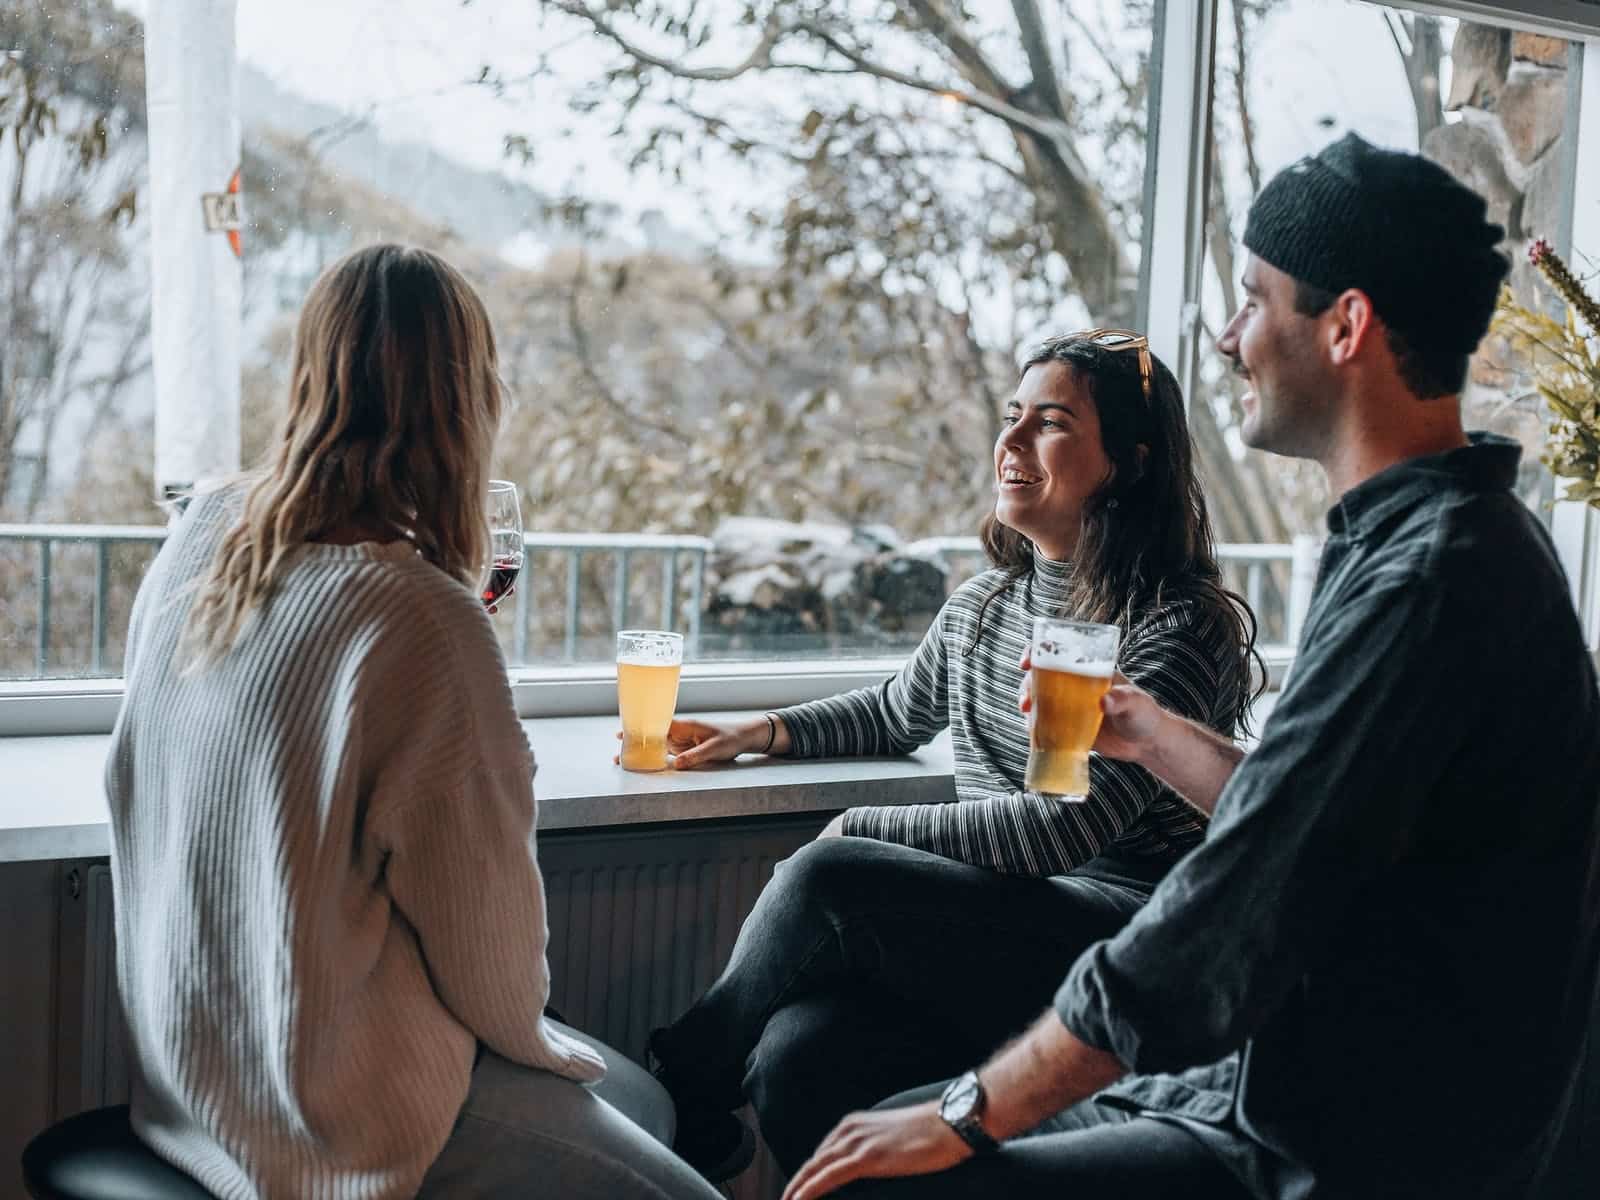 Three people having a beer at the restaurant window